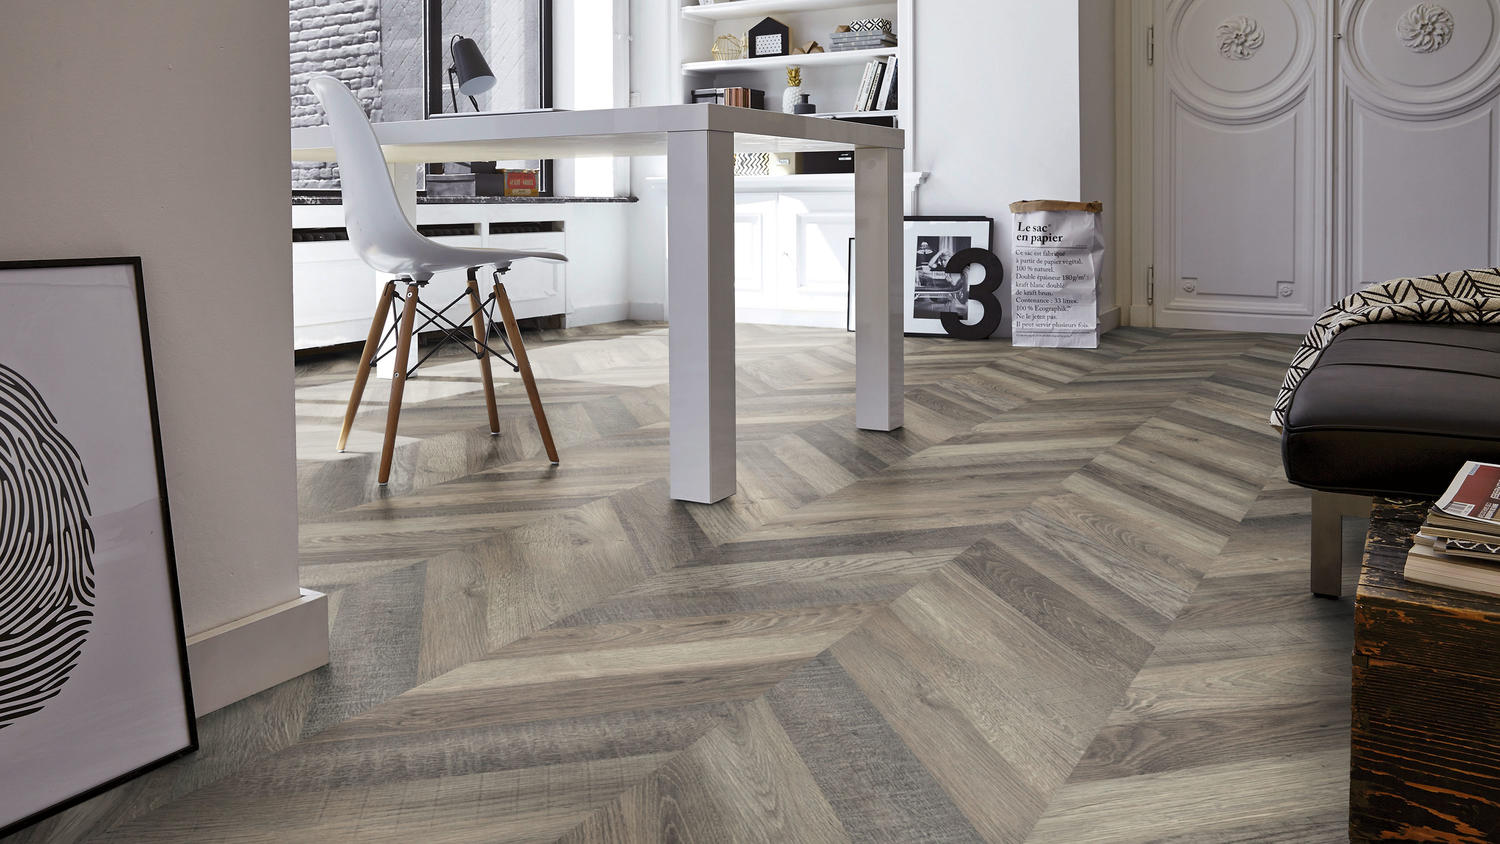 Laminate Flooring For Your Home Office, Laying Laminate Flooring On Wooden Floorboards